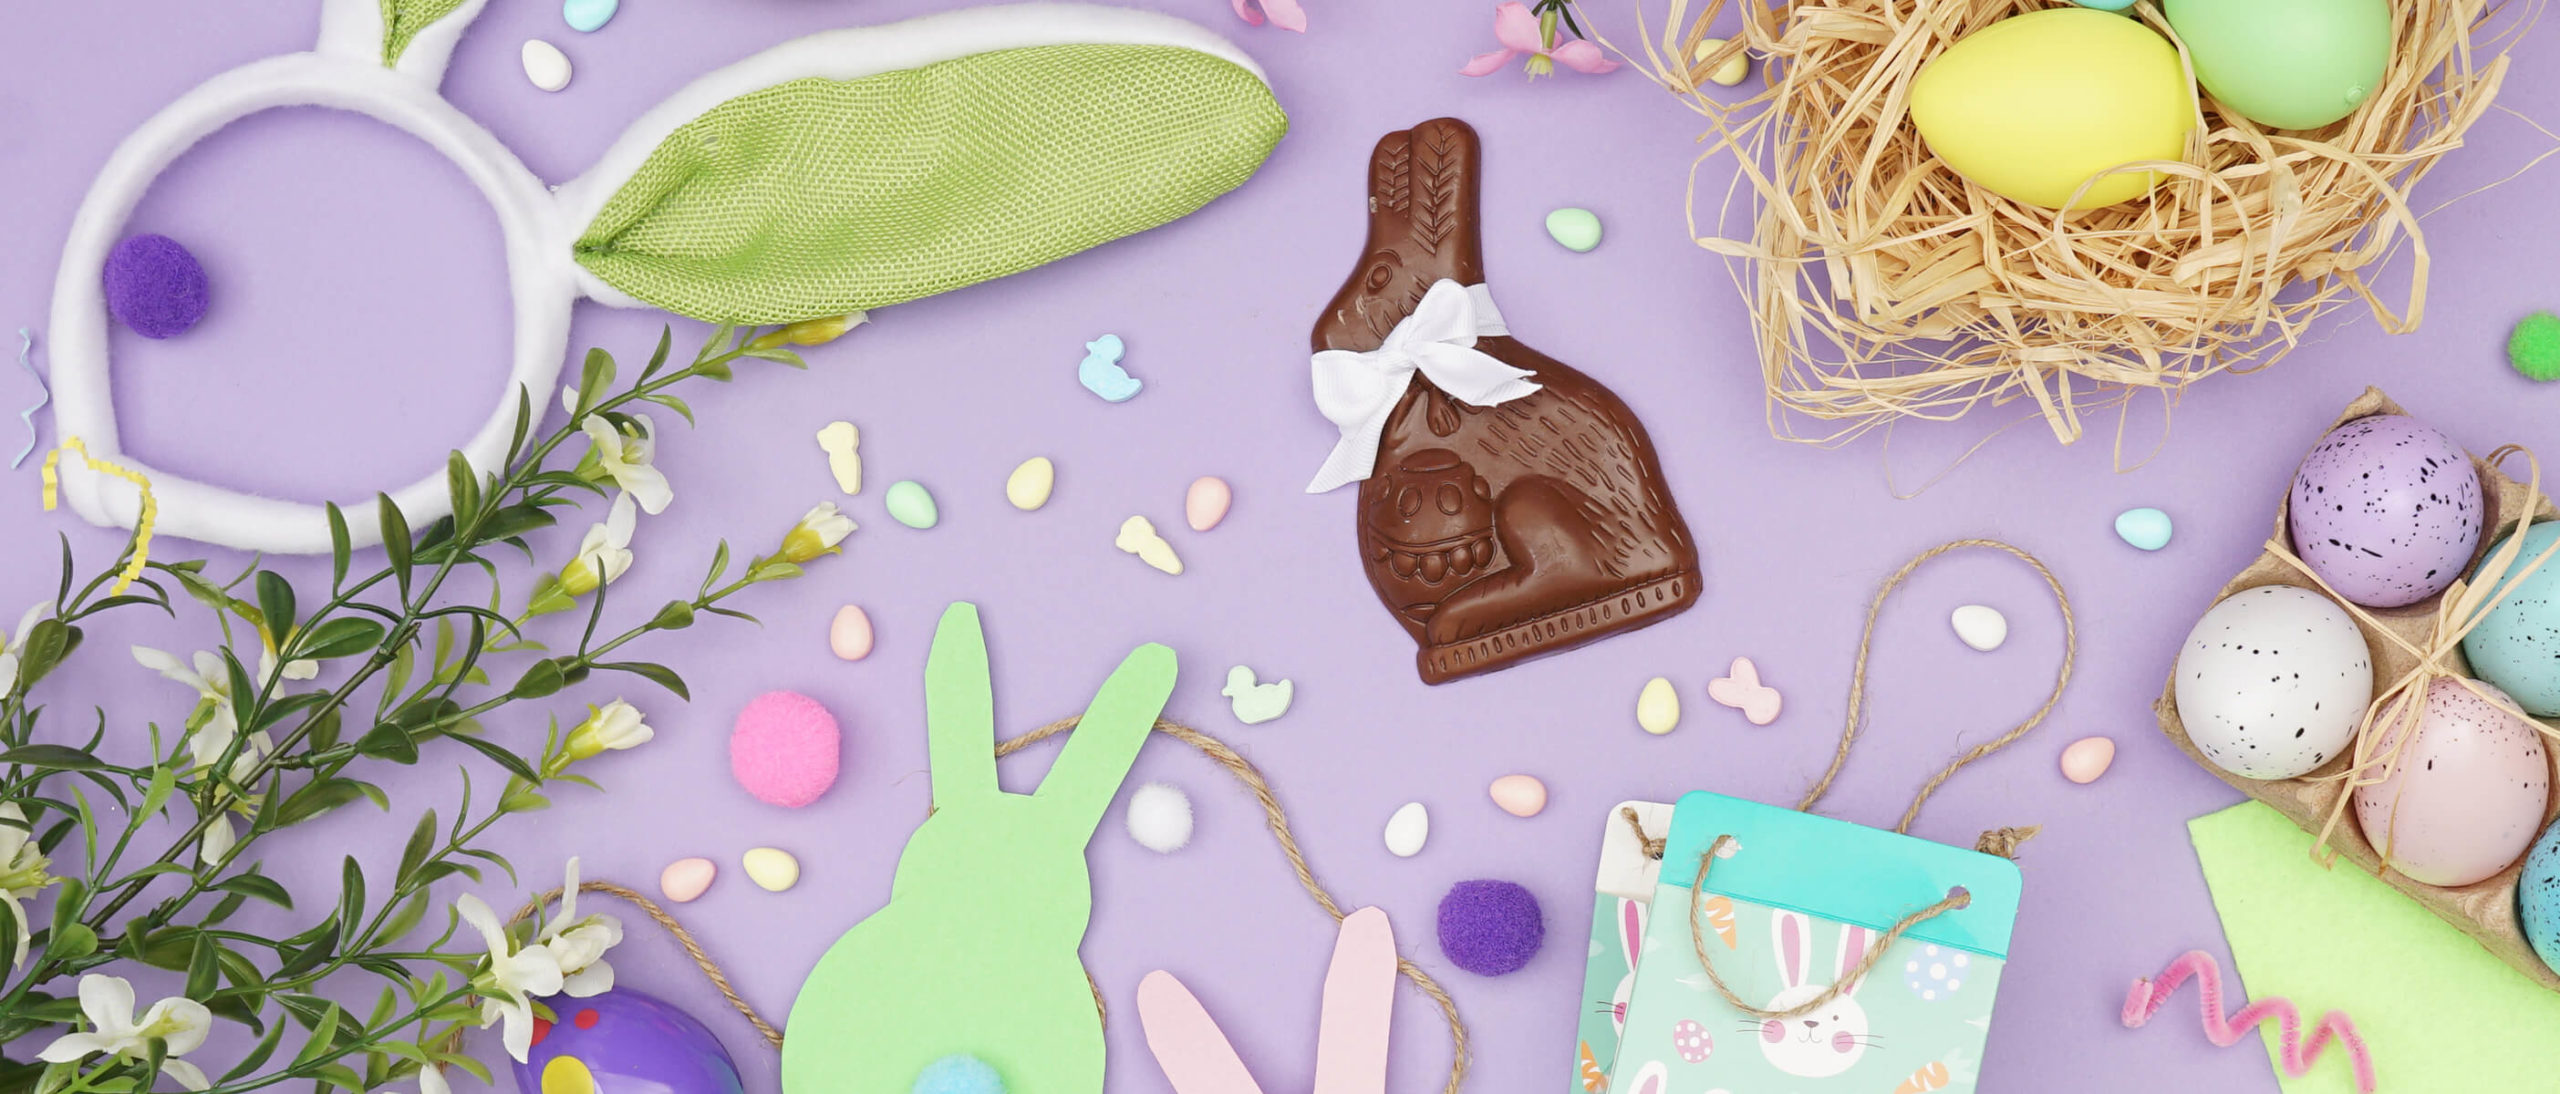 Have a “Hoppy” Easter With These Affordable Party Games for Kids